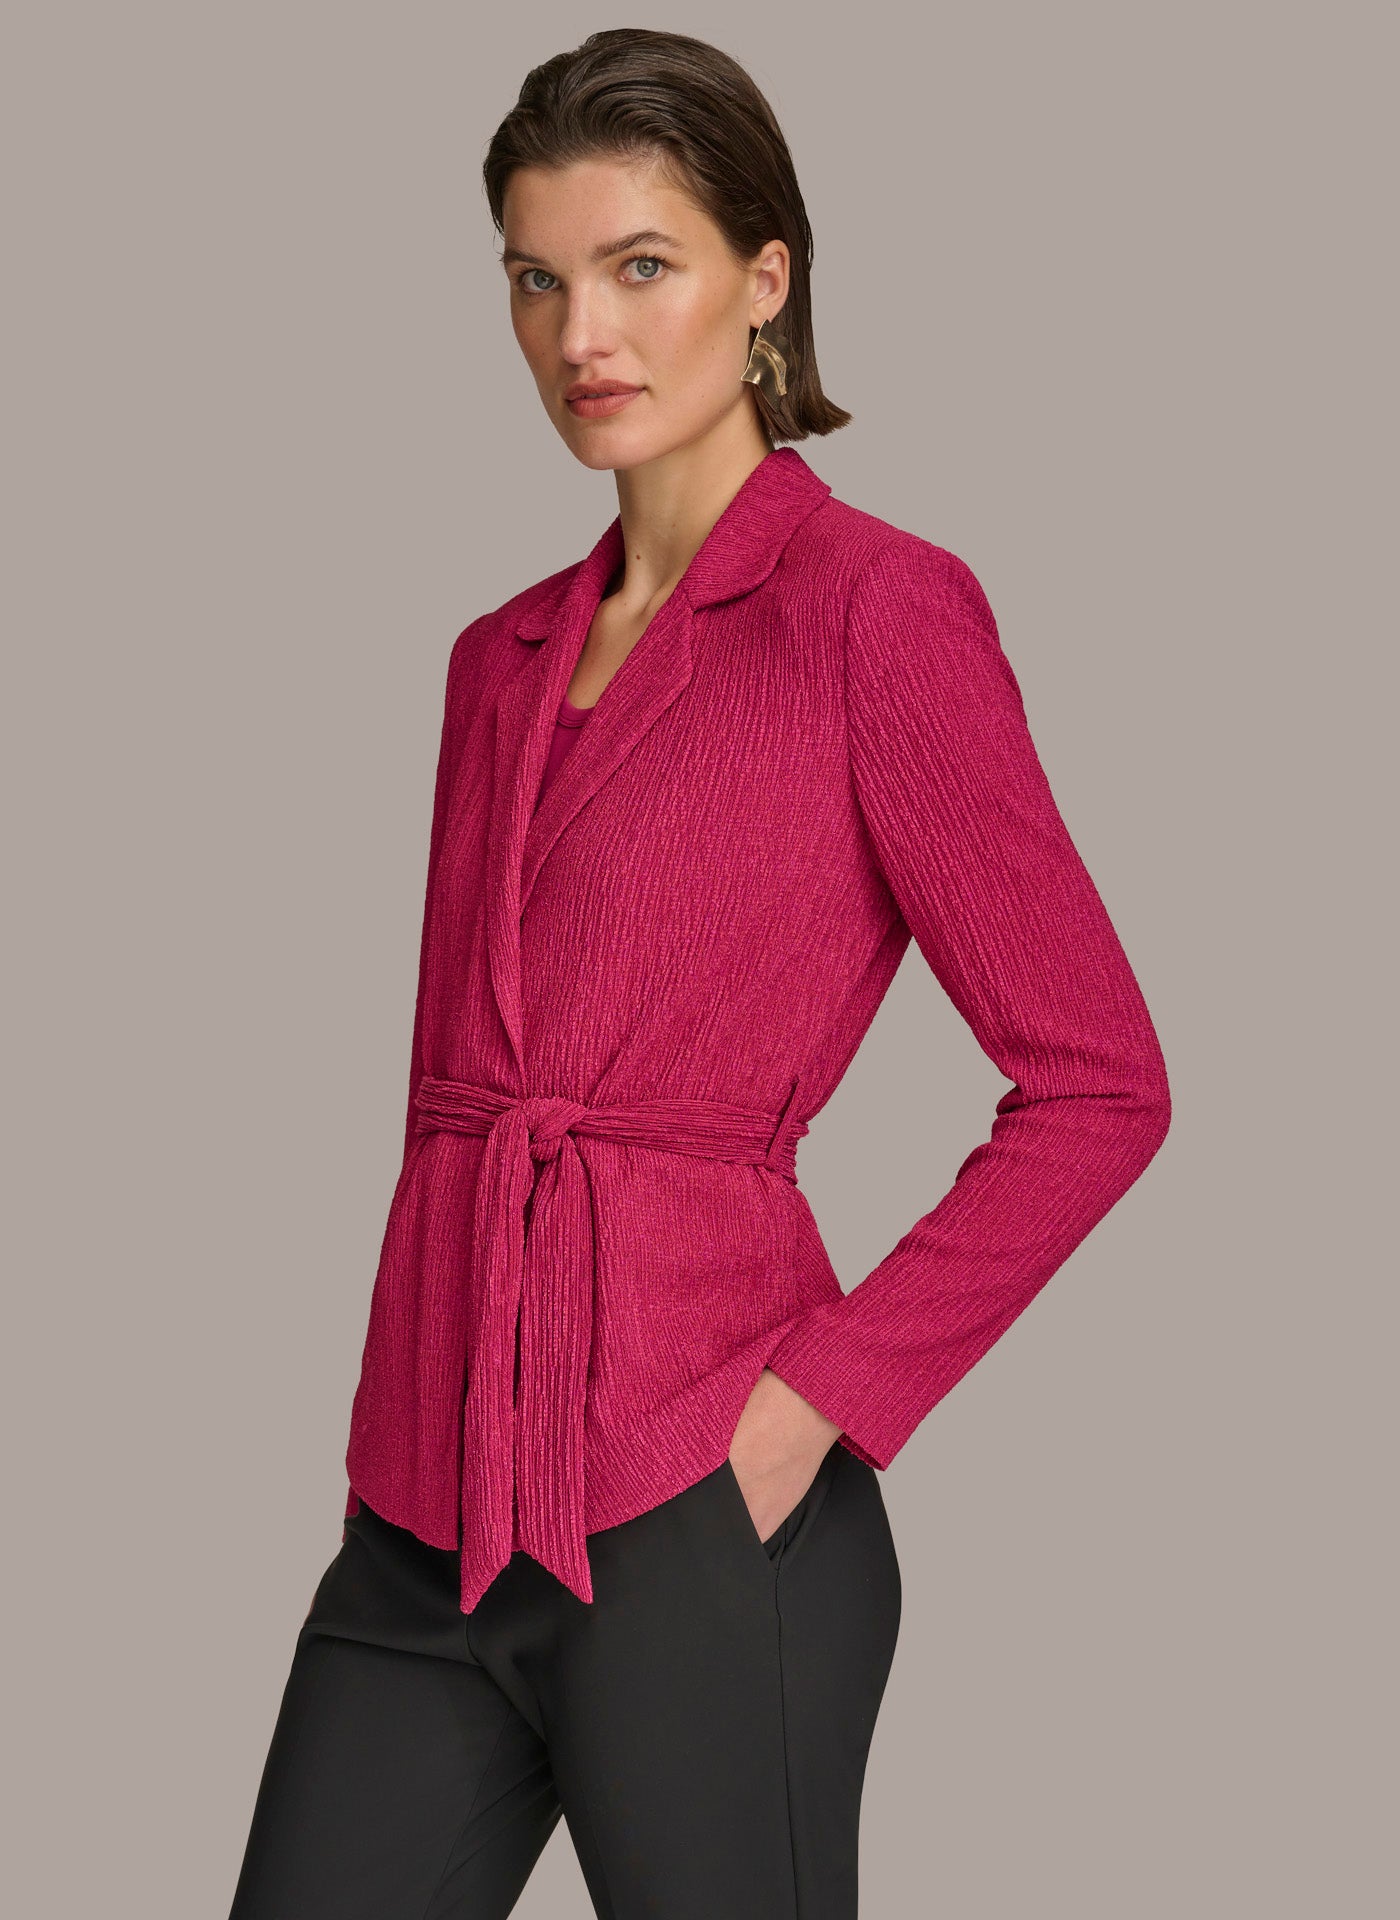 TEXTRE BELTED WRAP JACKET